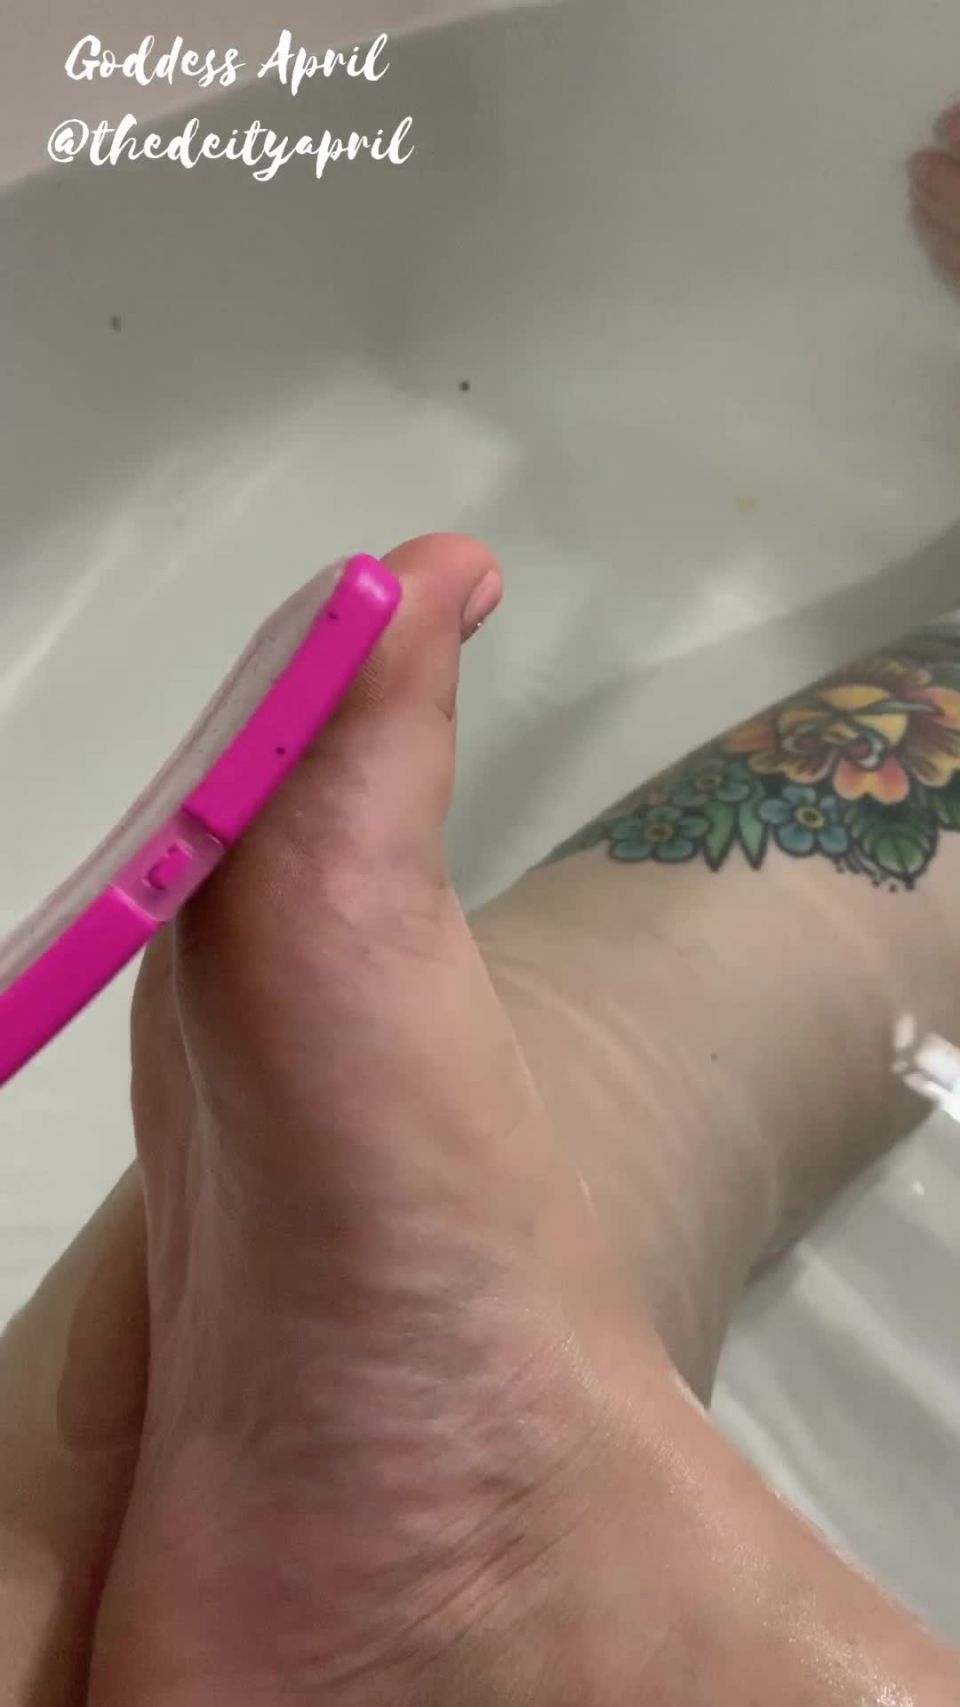 xxx clip 19 beta breakfast frosted foot flakes, brunette foot fetish on fetish porn 